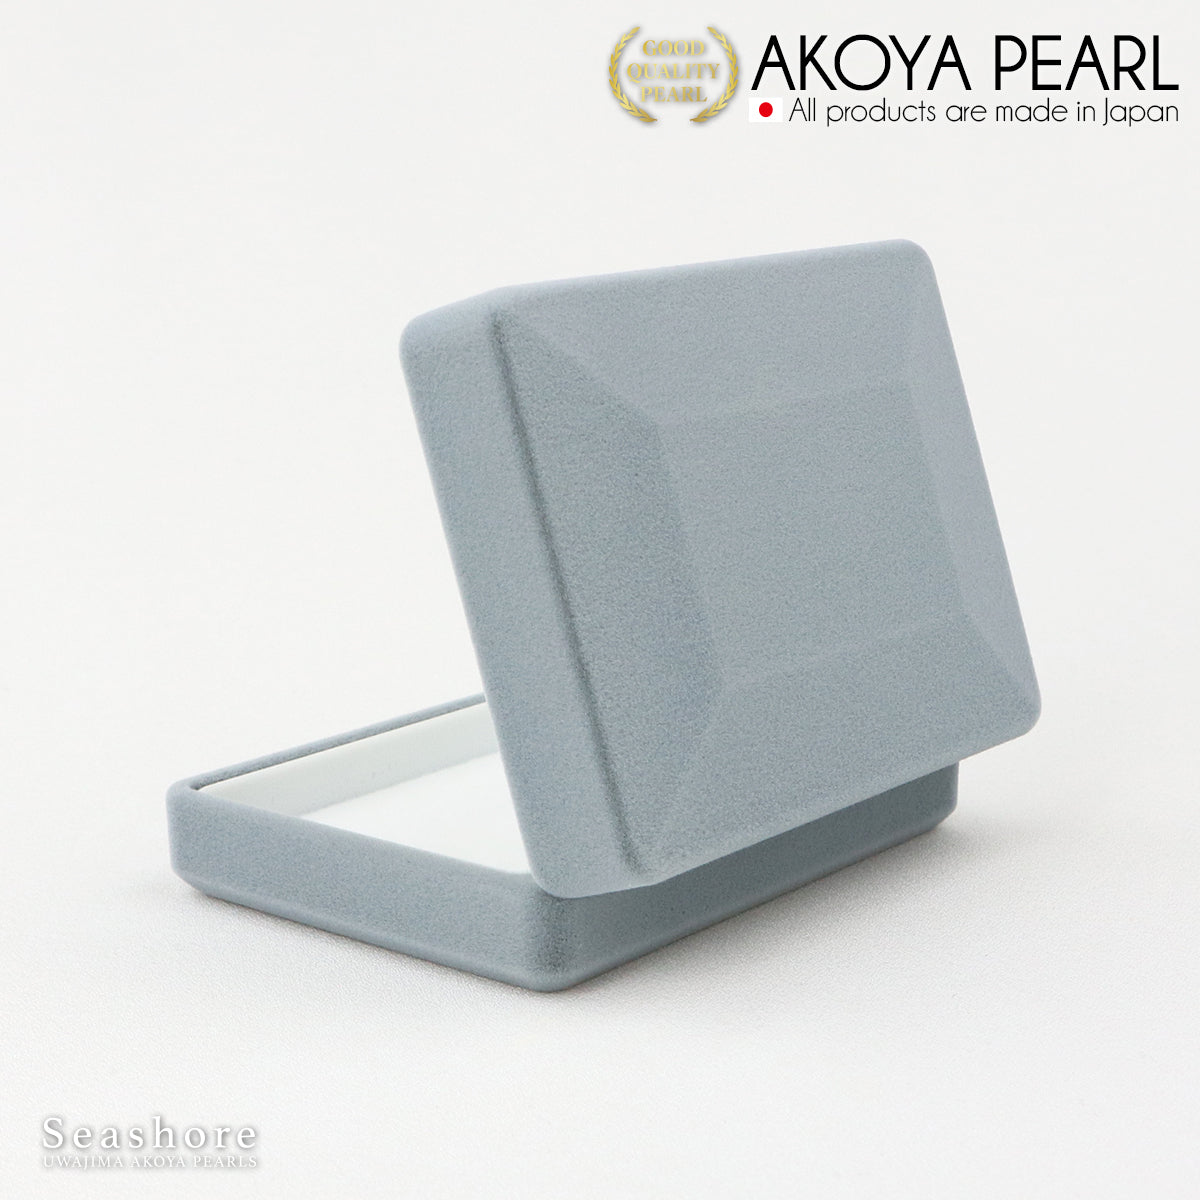 Brooch case compact velor-like fabric pearl case gray (1.0.745.8)